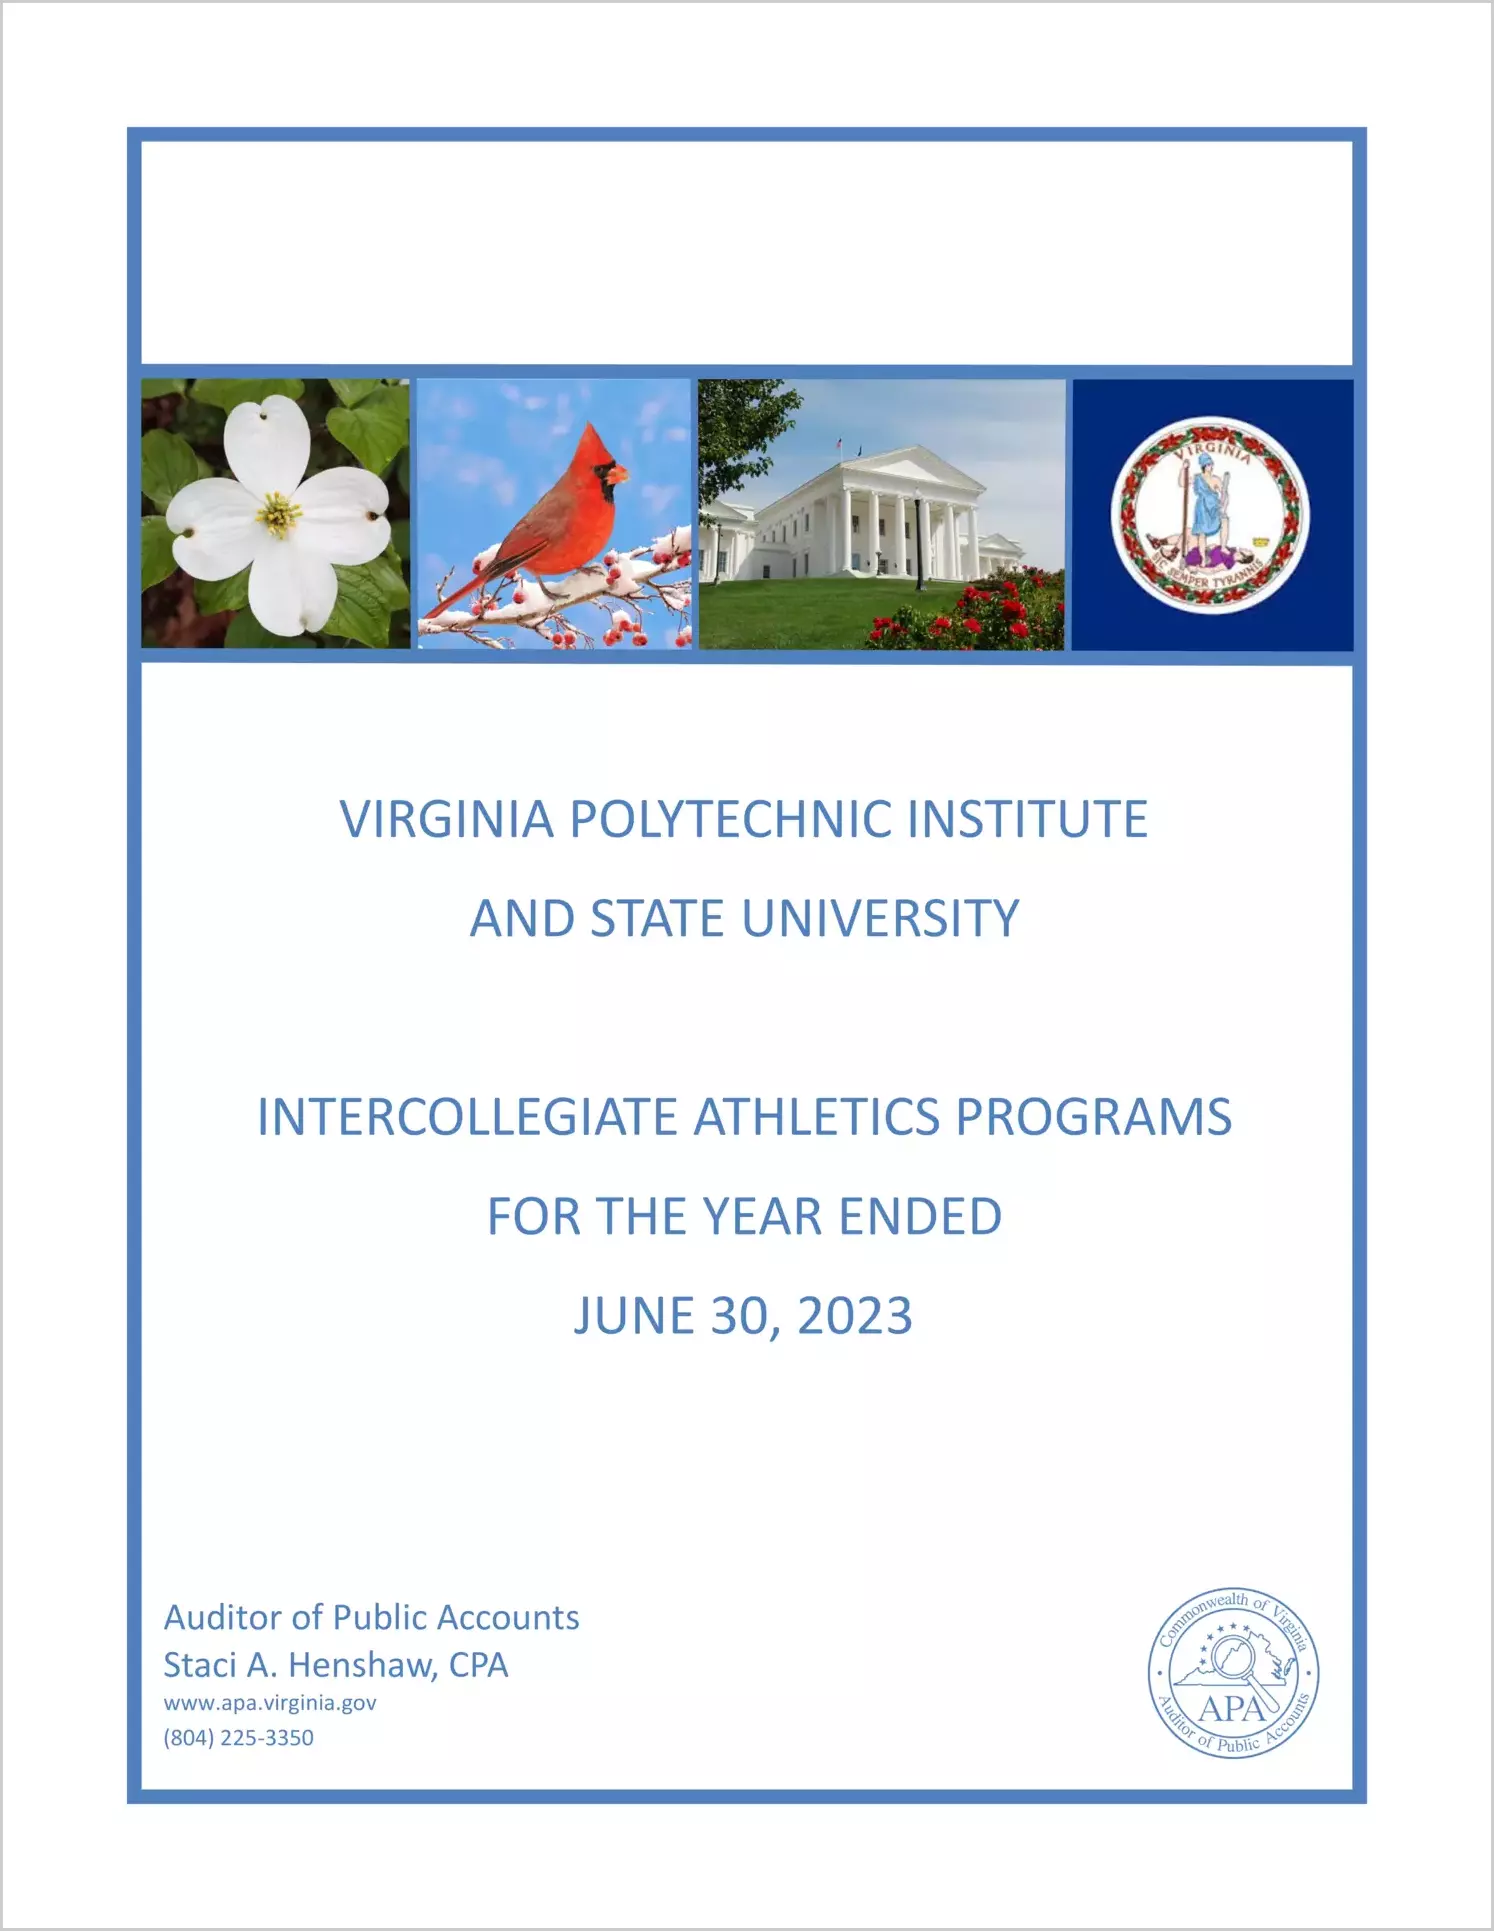 Virginia Polytechnic Institute and State University Intercollegiate Athletics Programs for the year ended June 30, 2023